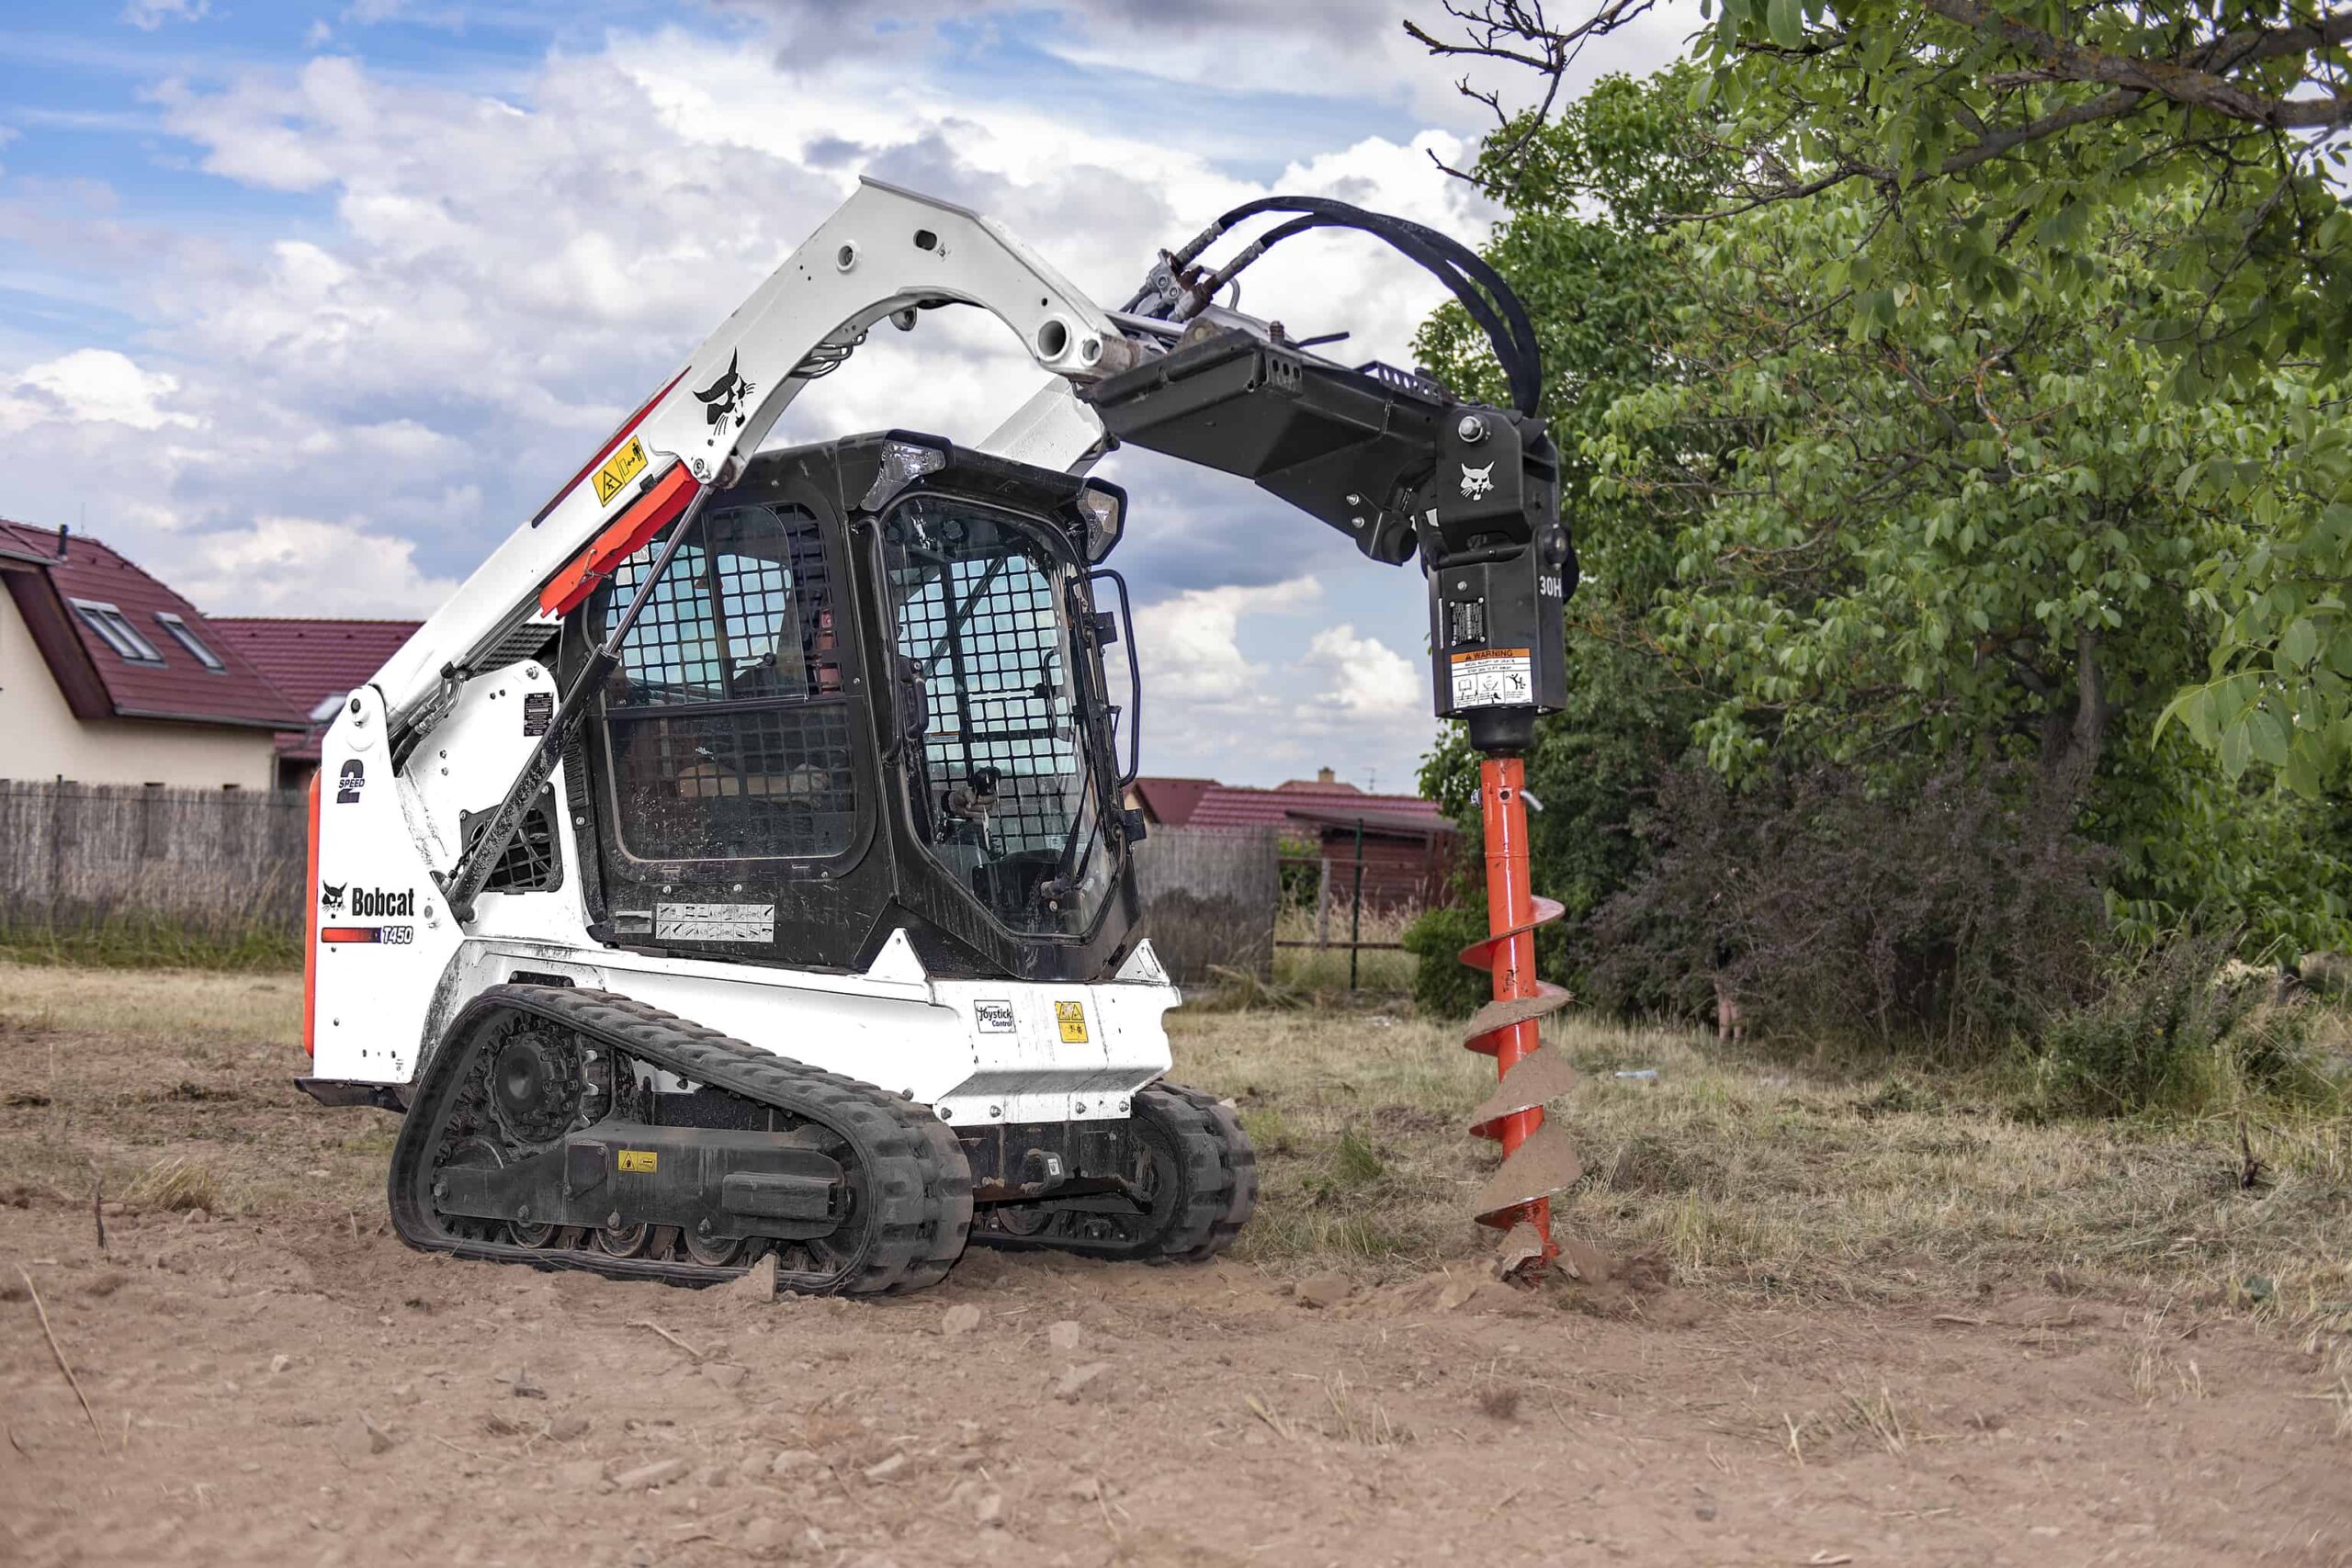 New telescopic loaders and quad-tracked machine concept